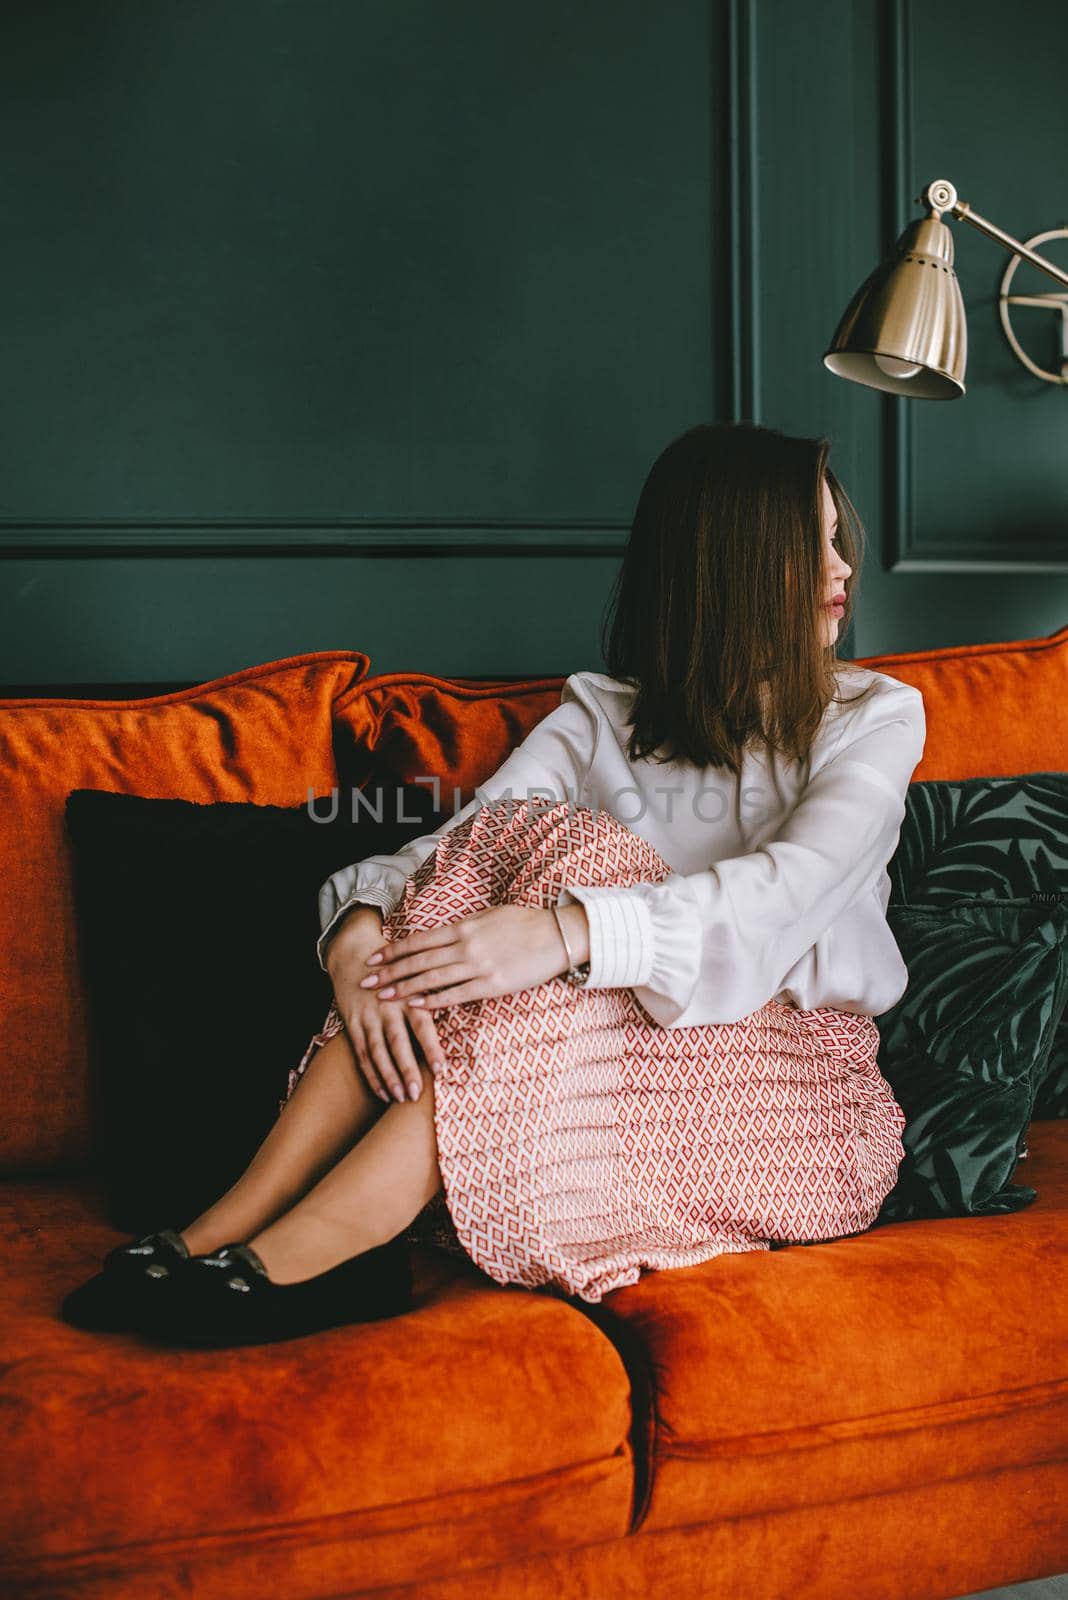 Portrait of fashionable young woman in a beige skirt, white blouse and stylish beige black seude shoes with a buckle posing on a orange sofa. by Ashtray25